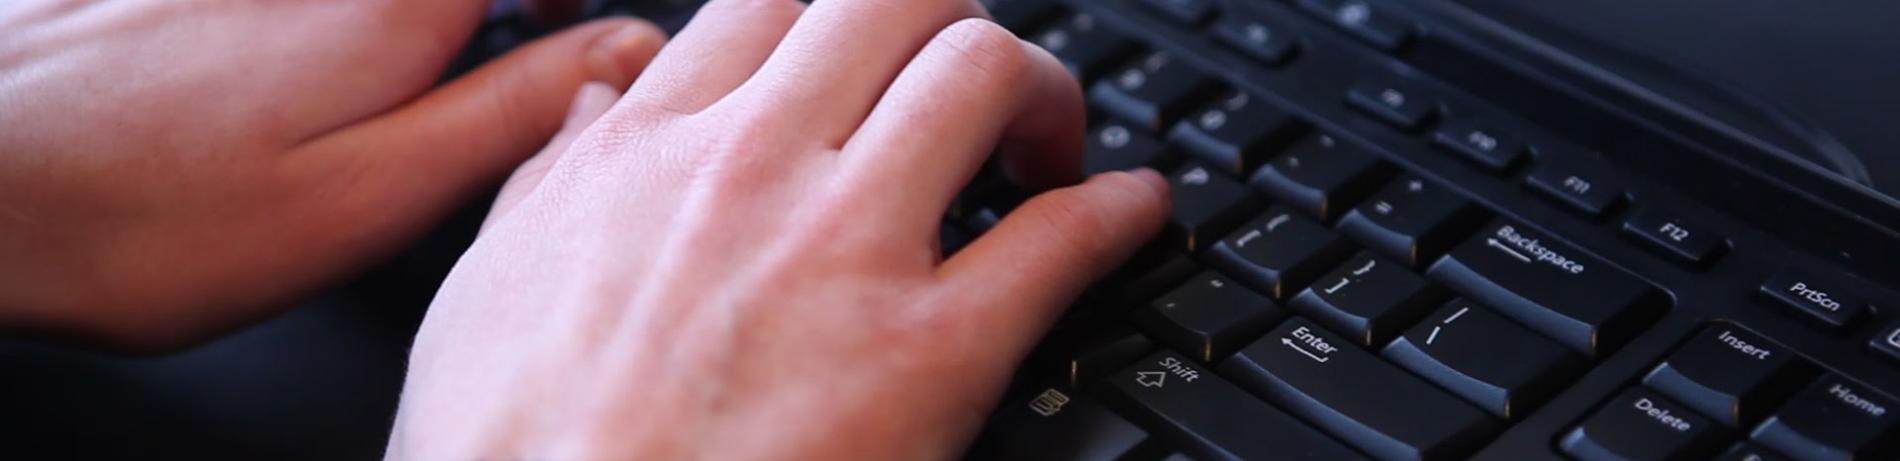 close up of hands typing on a black keyboard.